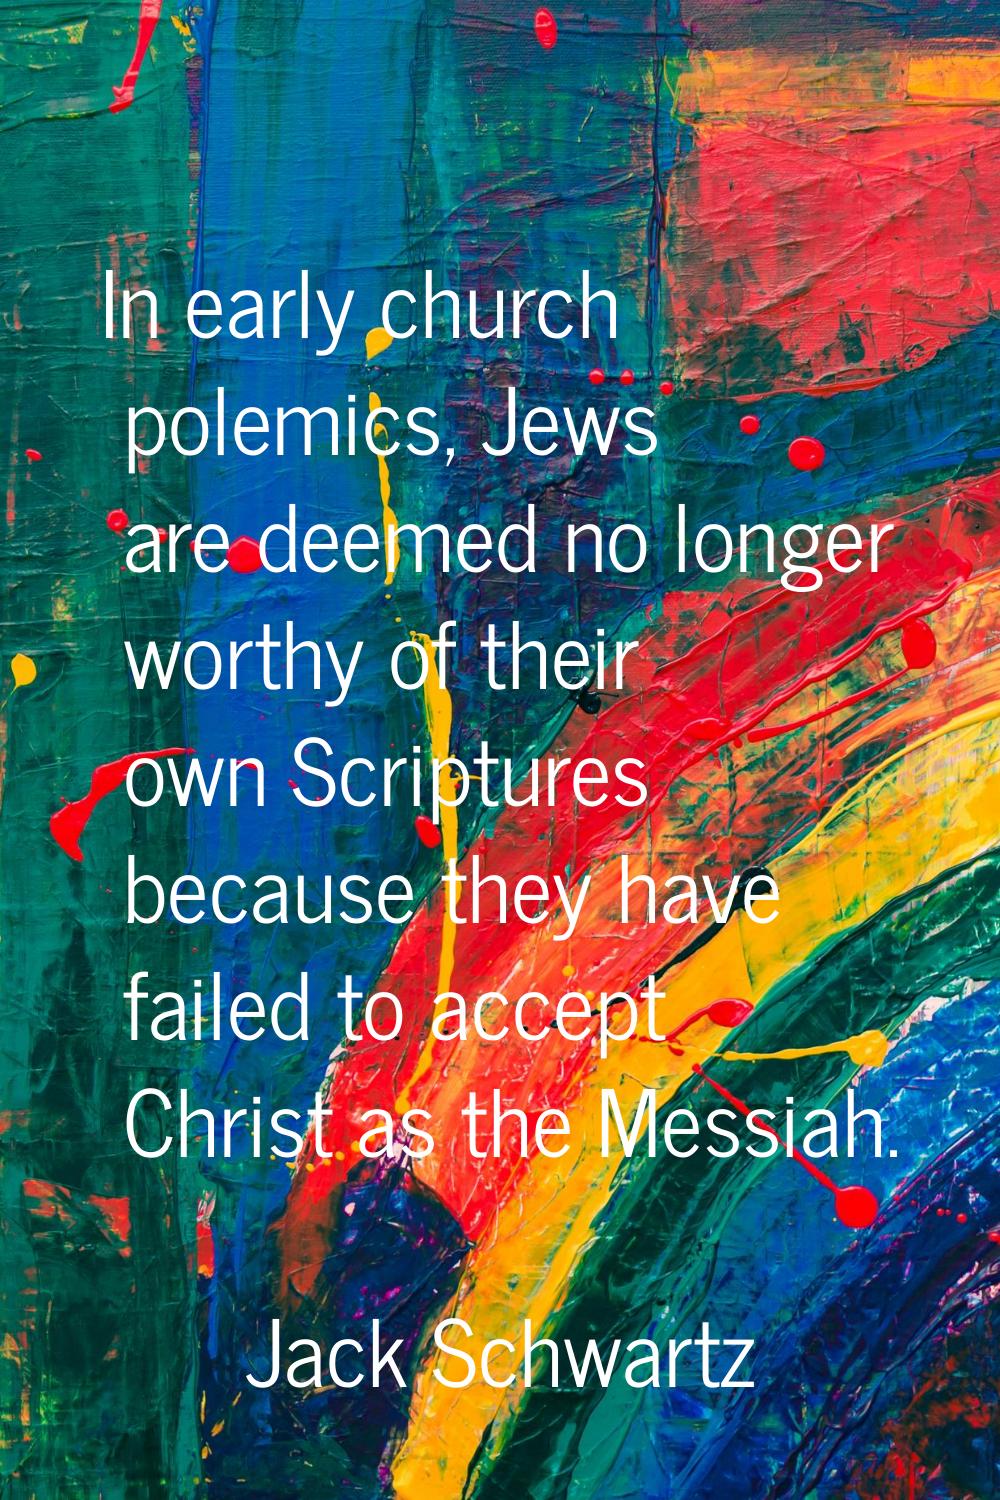 In early church polemics, Jews are deemed no longer worthy of their own Scriptures because they hav